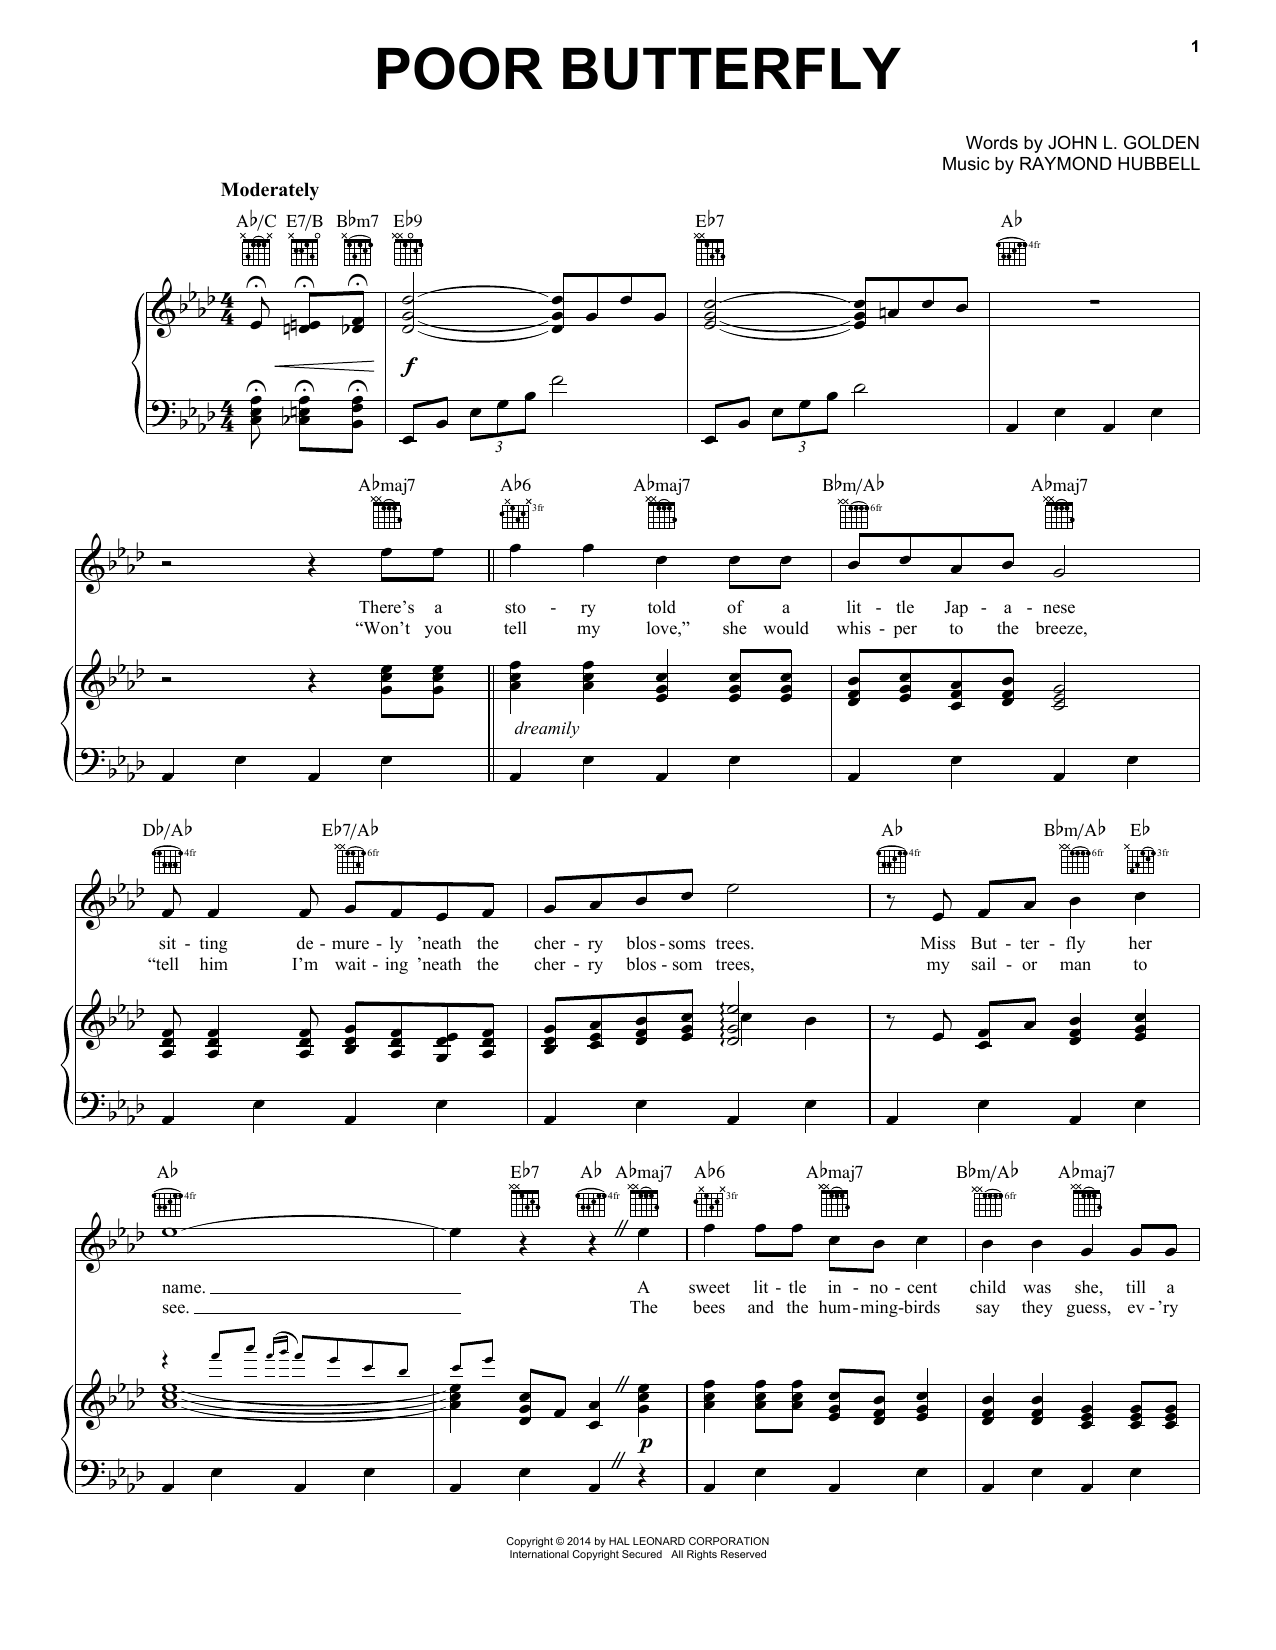 Count Basie Poor Butterfly sheet music notes and chords. Download Printable PDF.